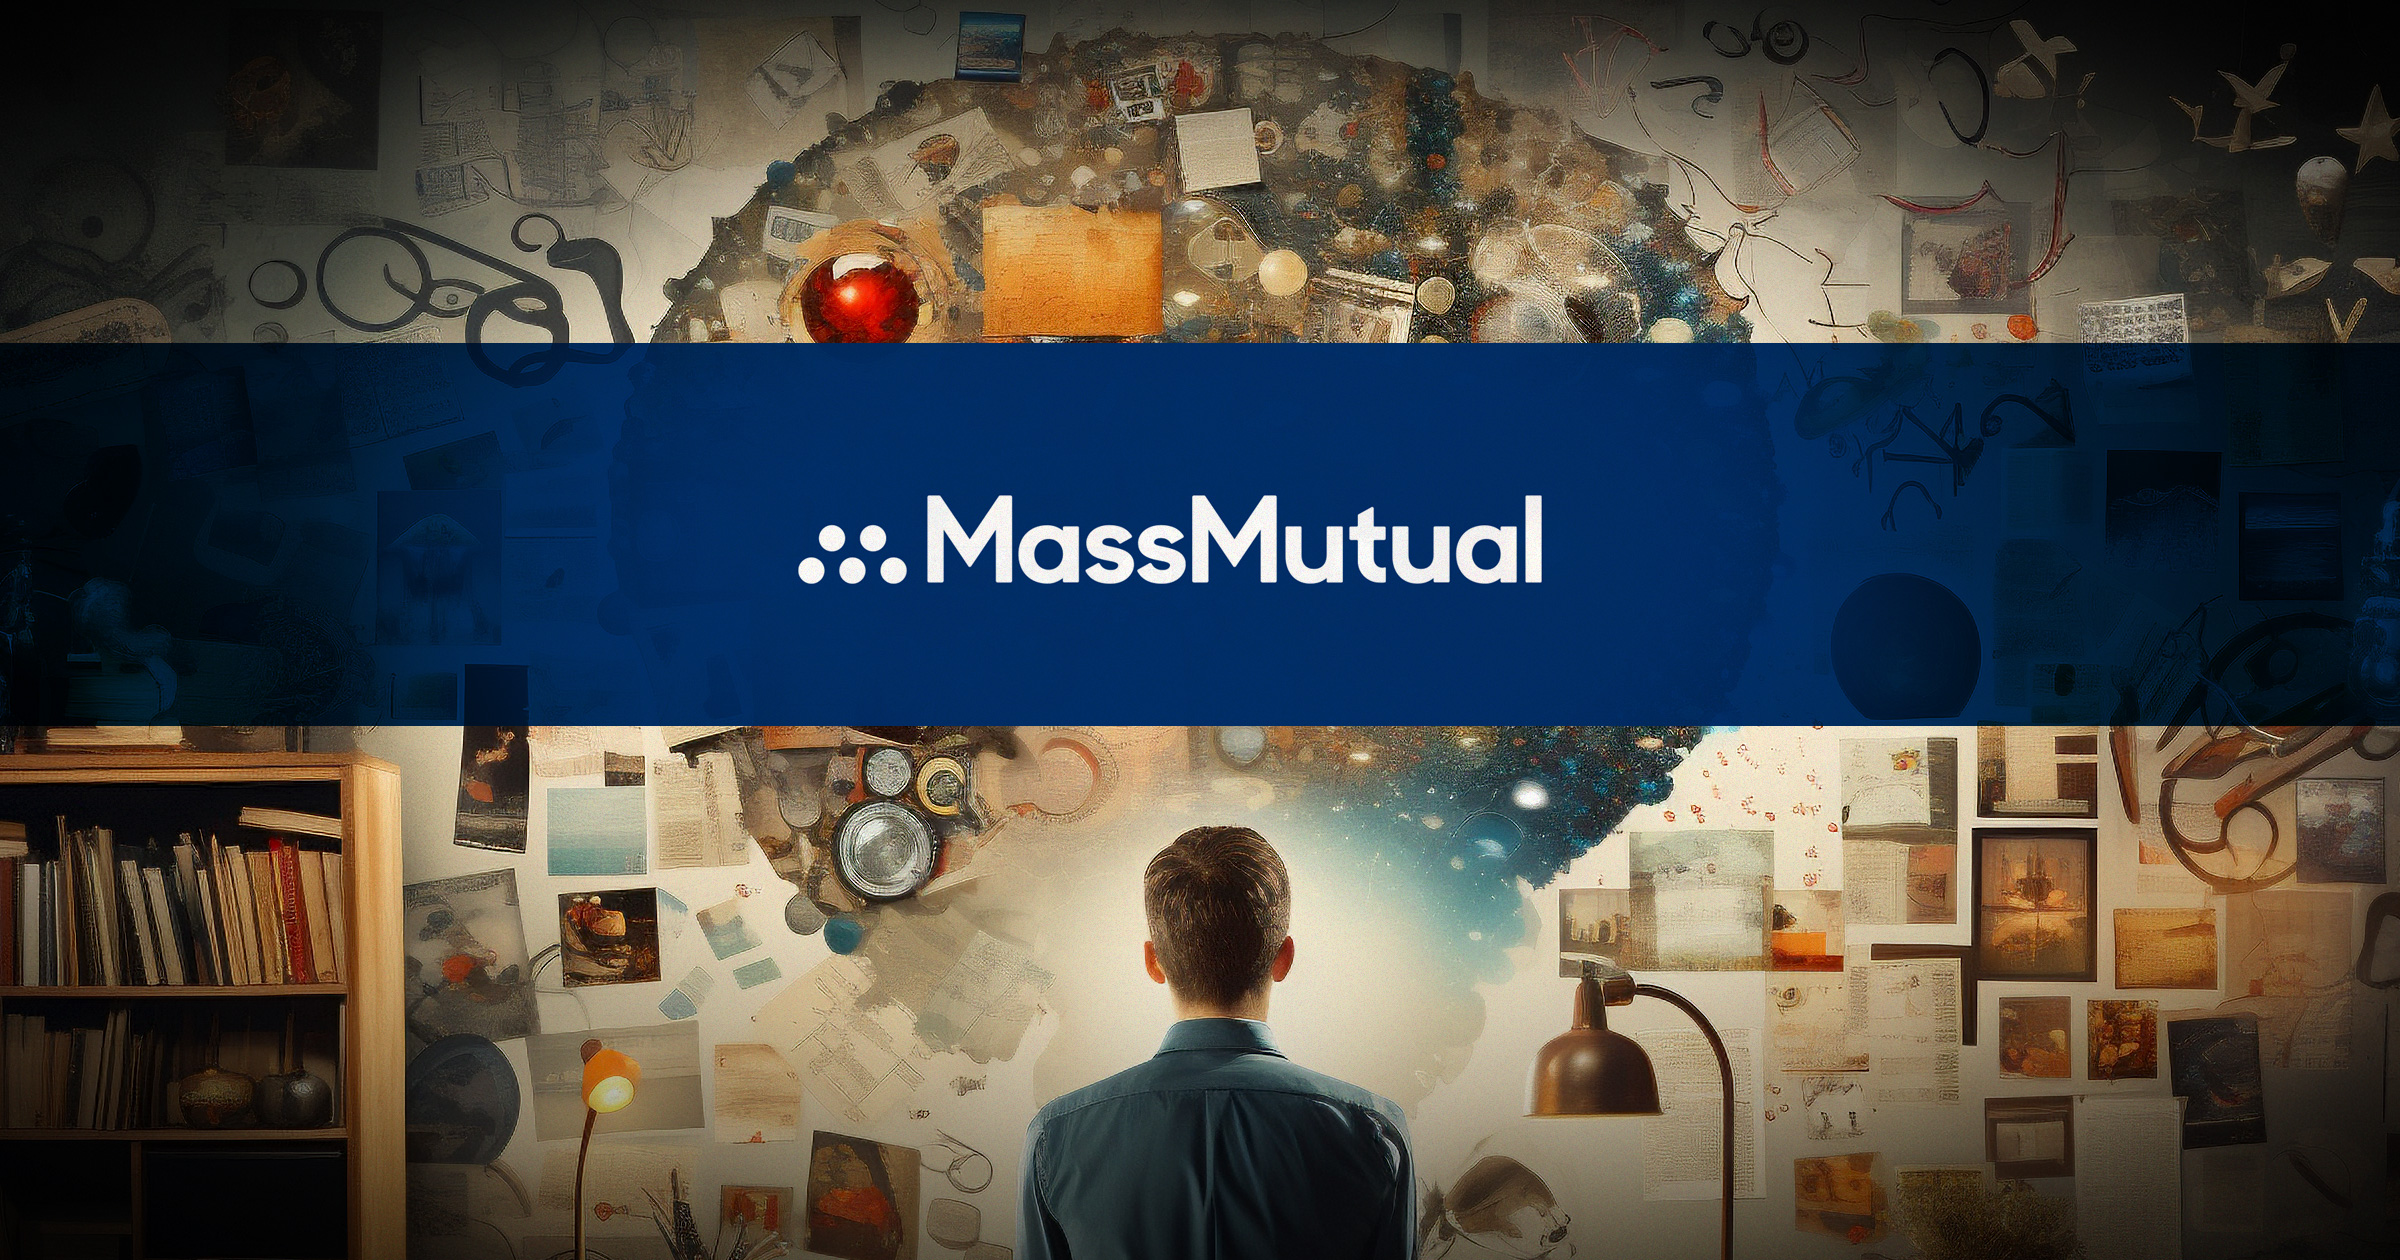 Massmutual phone number for agents